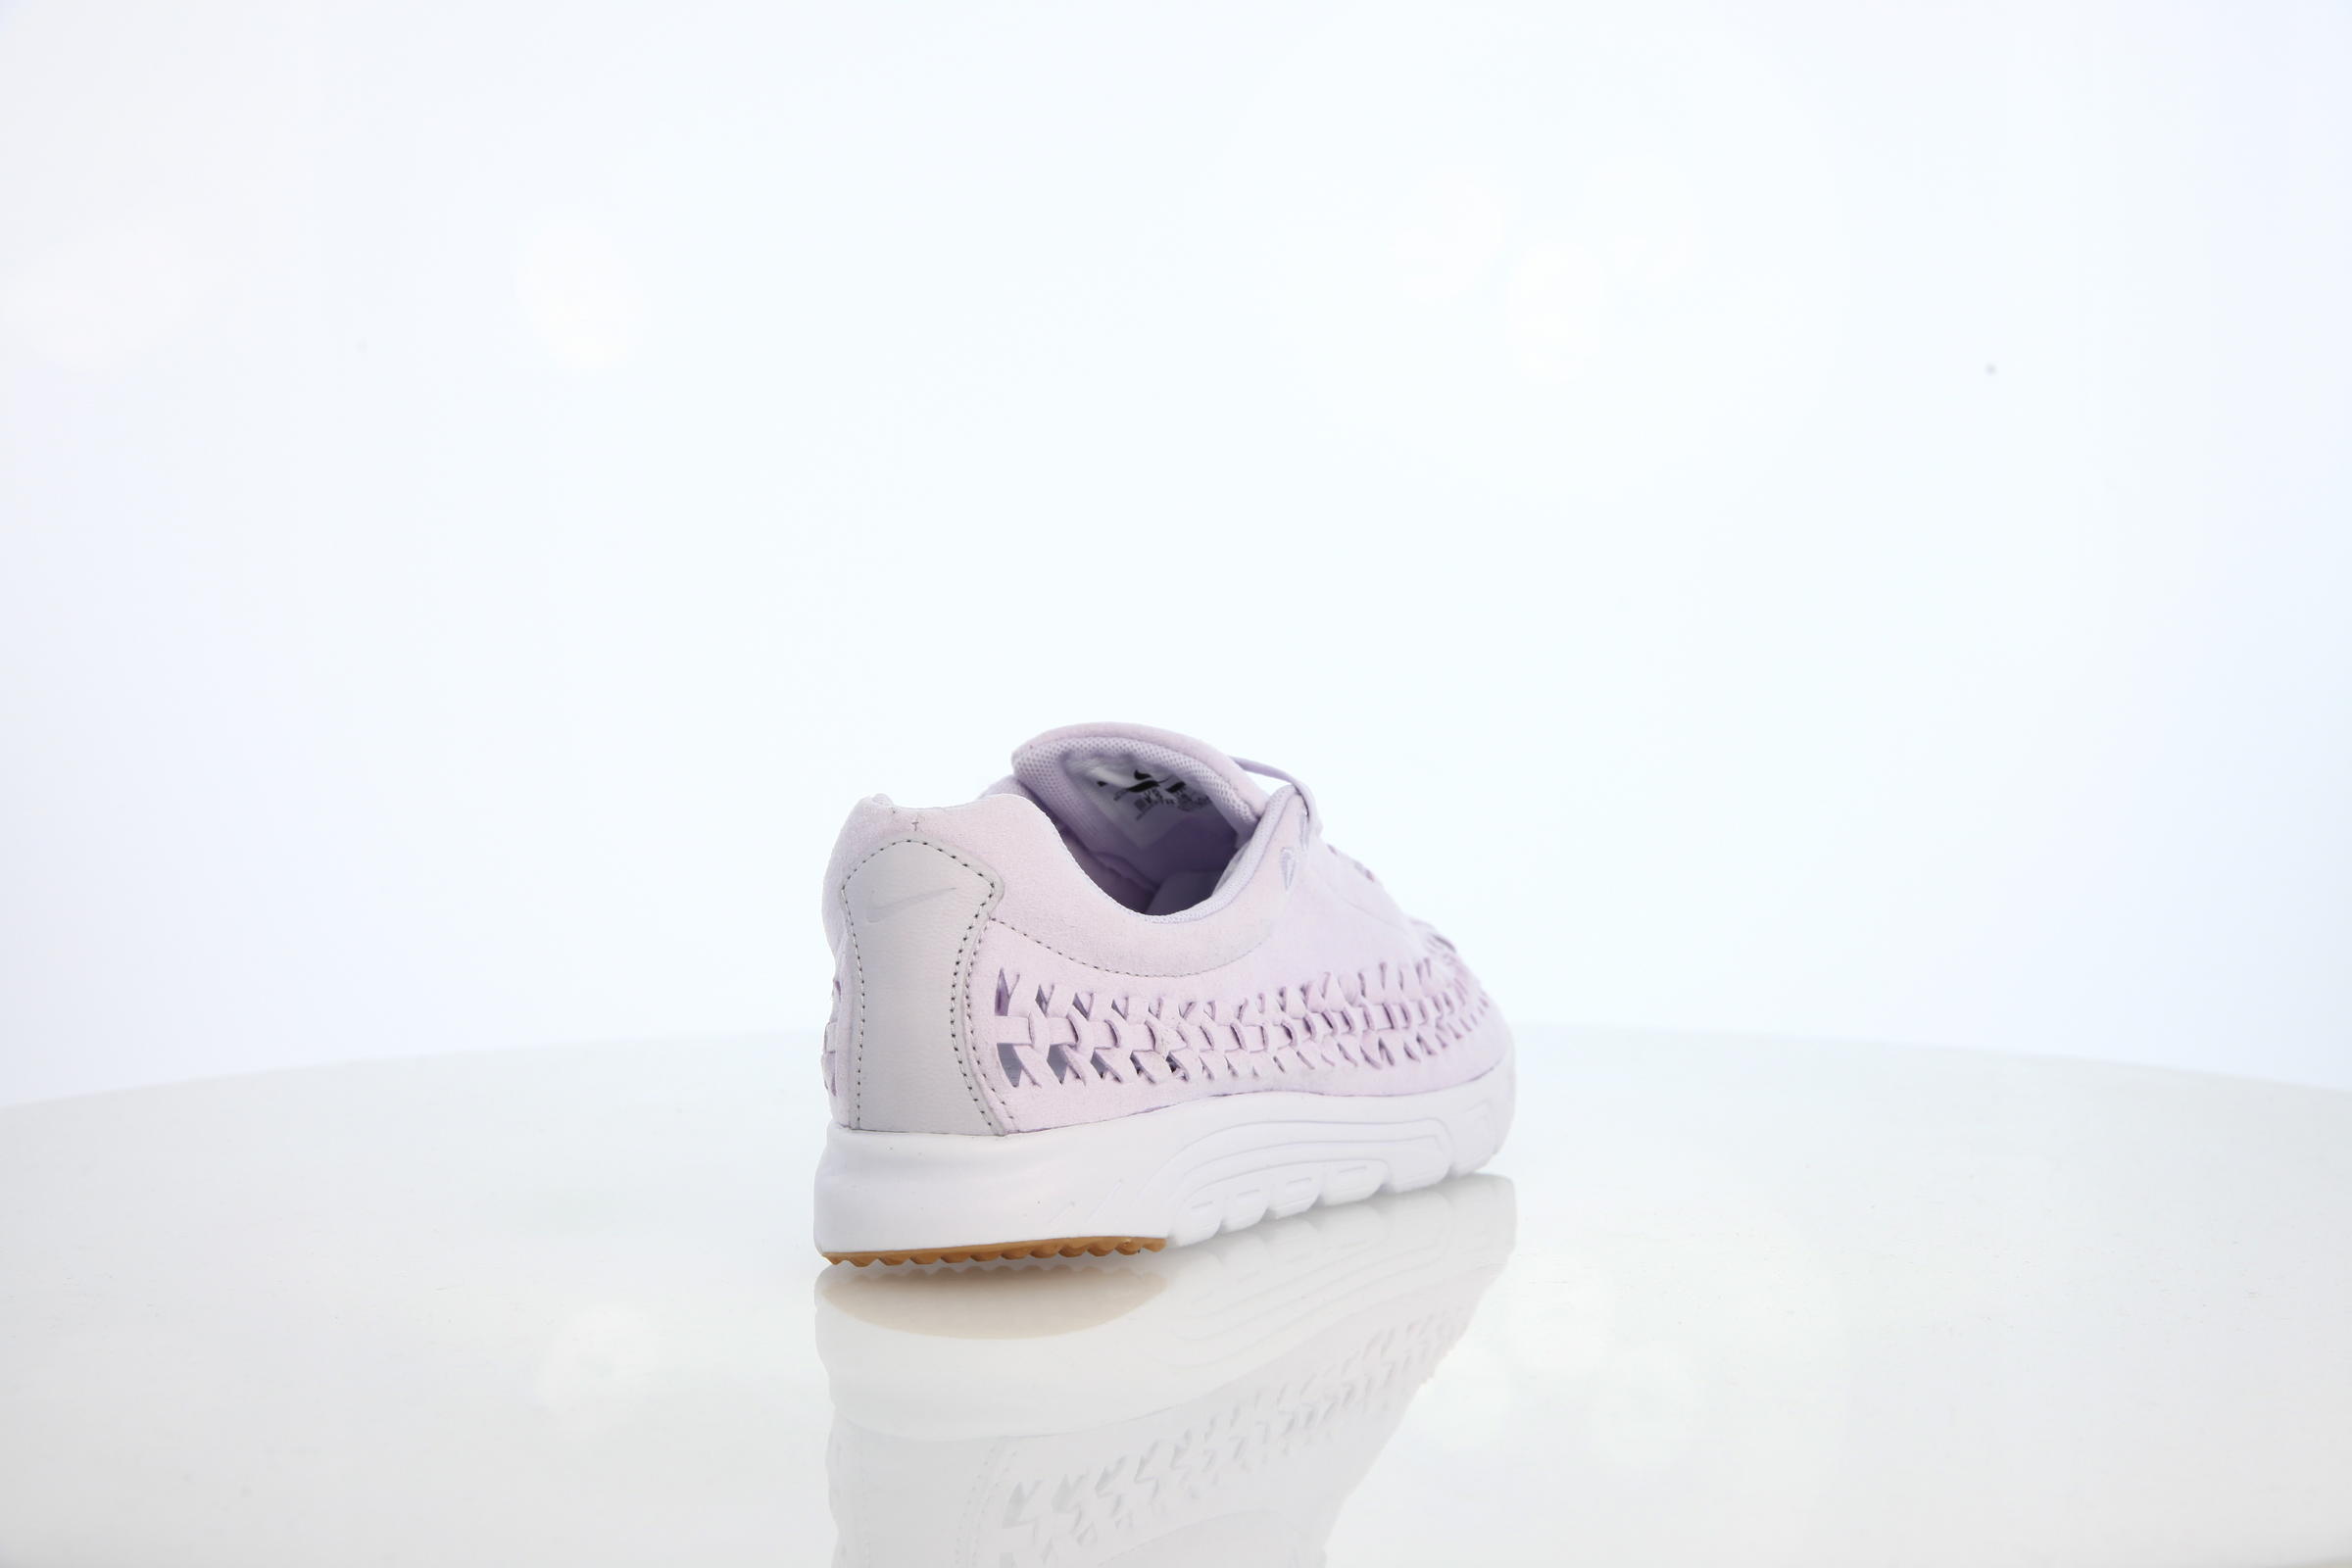 Nike Wmns Mayfly Woven QS Pastel Pack "Barely Grape"